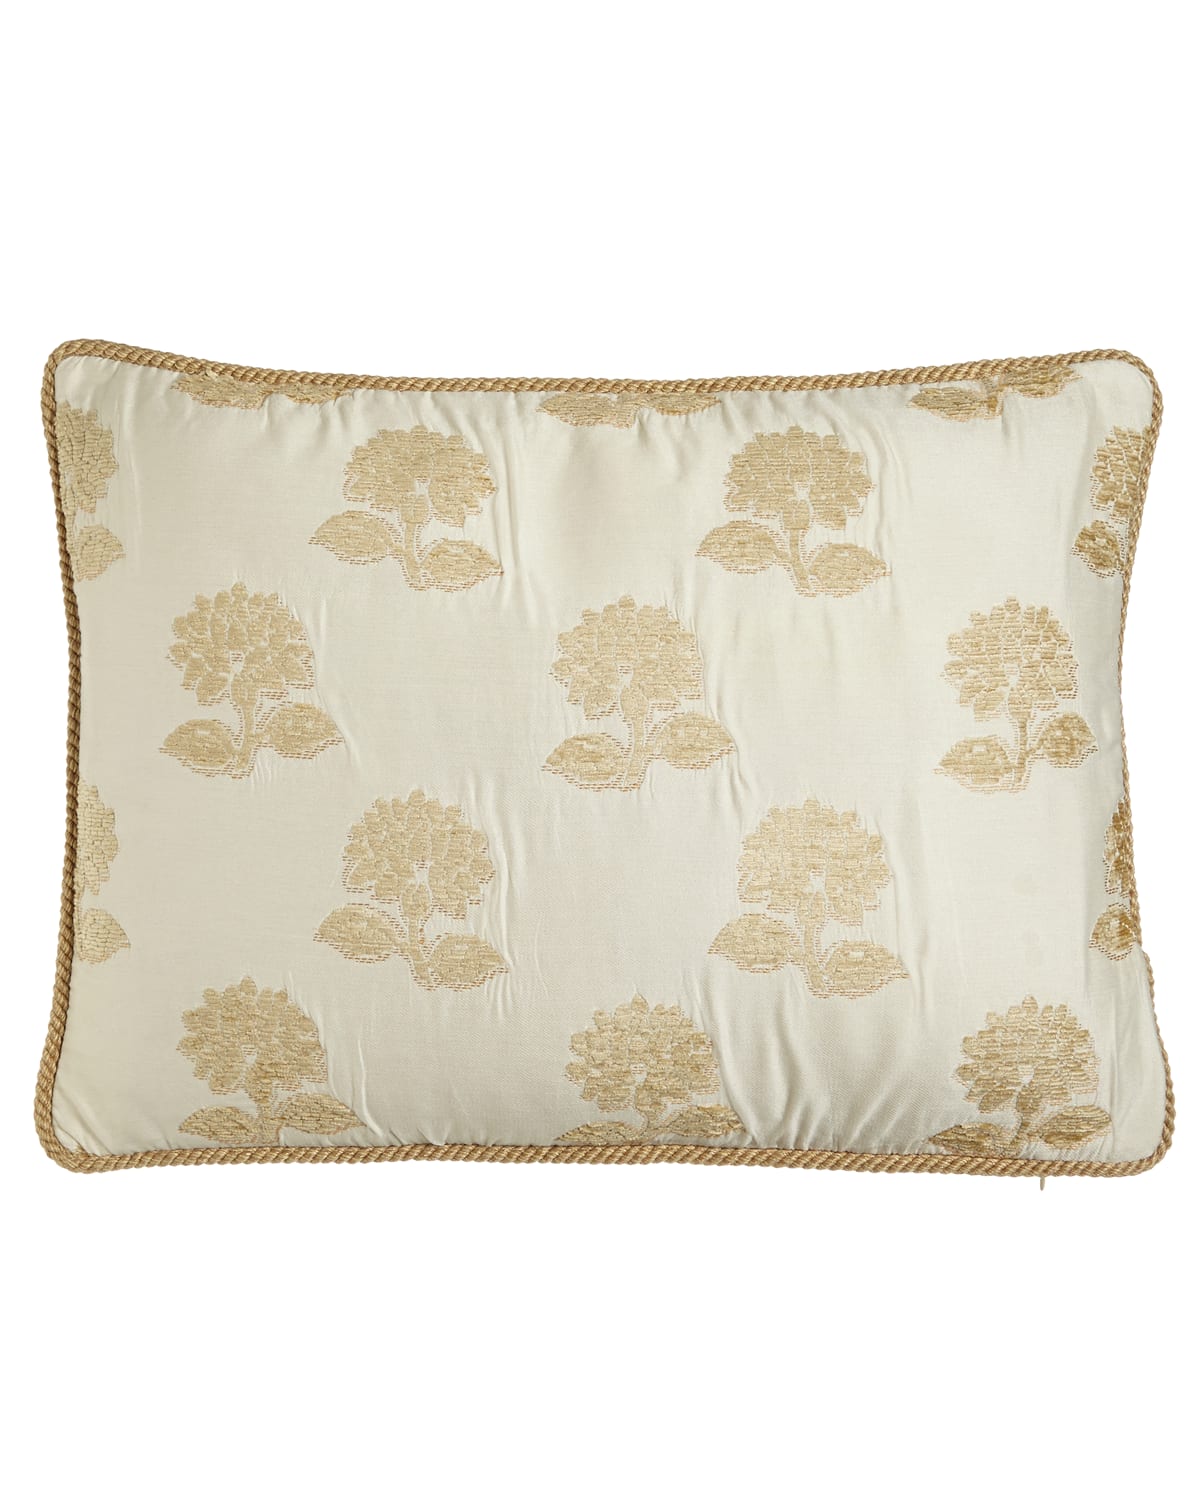 Austin Horn Collection Antoinette King Sham With Chenille Flowers & Cord Trim